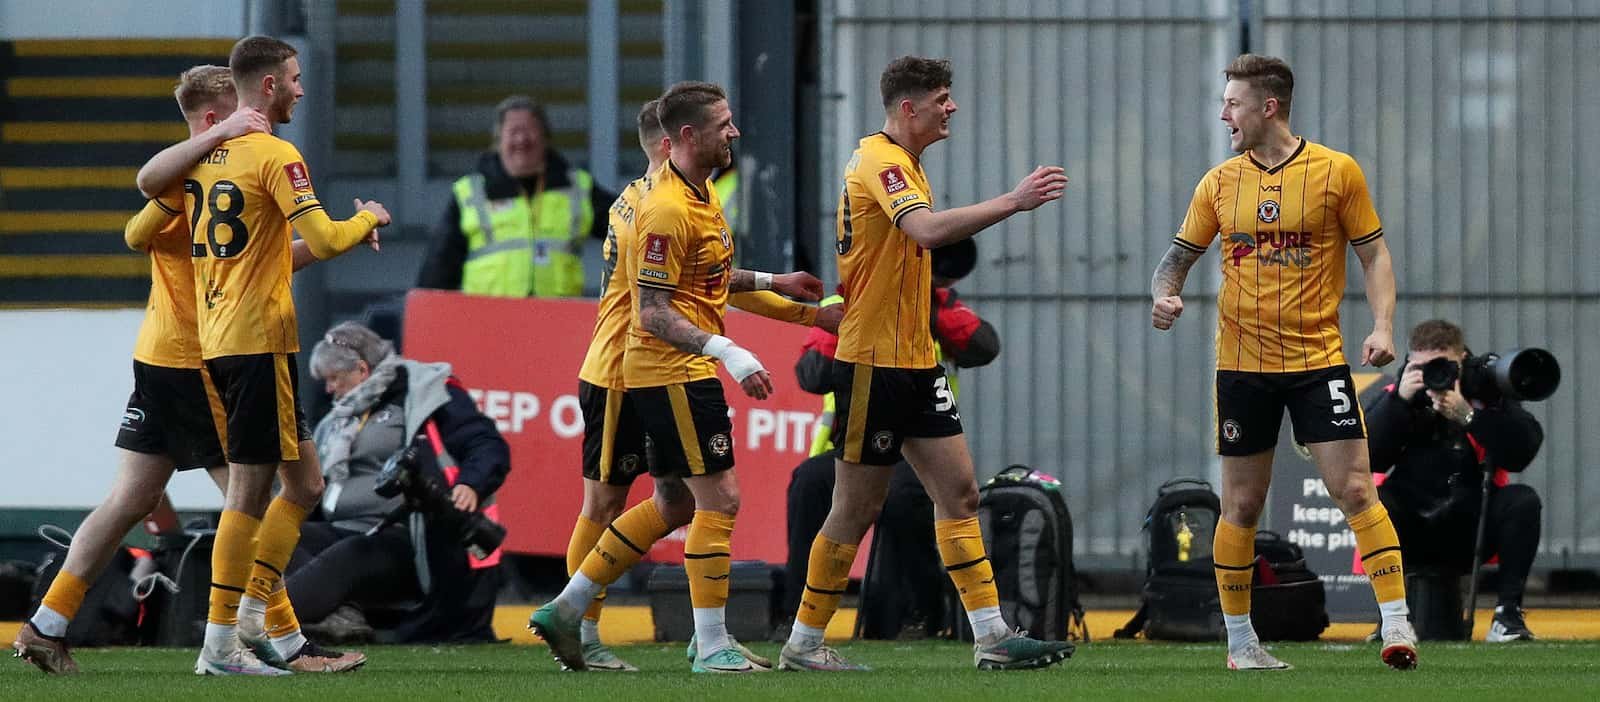 Newport County shut down ticket office ahead of clash vs. Man United due to “appalling abuse” directed at staff – Man United News And Transfer News